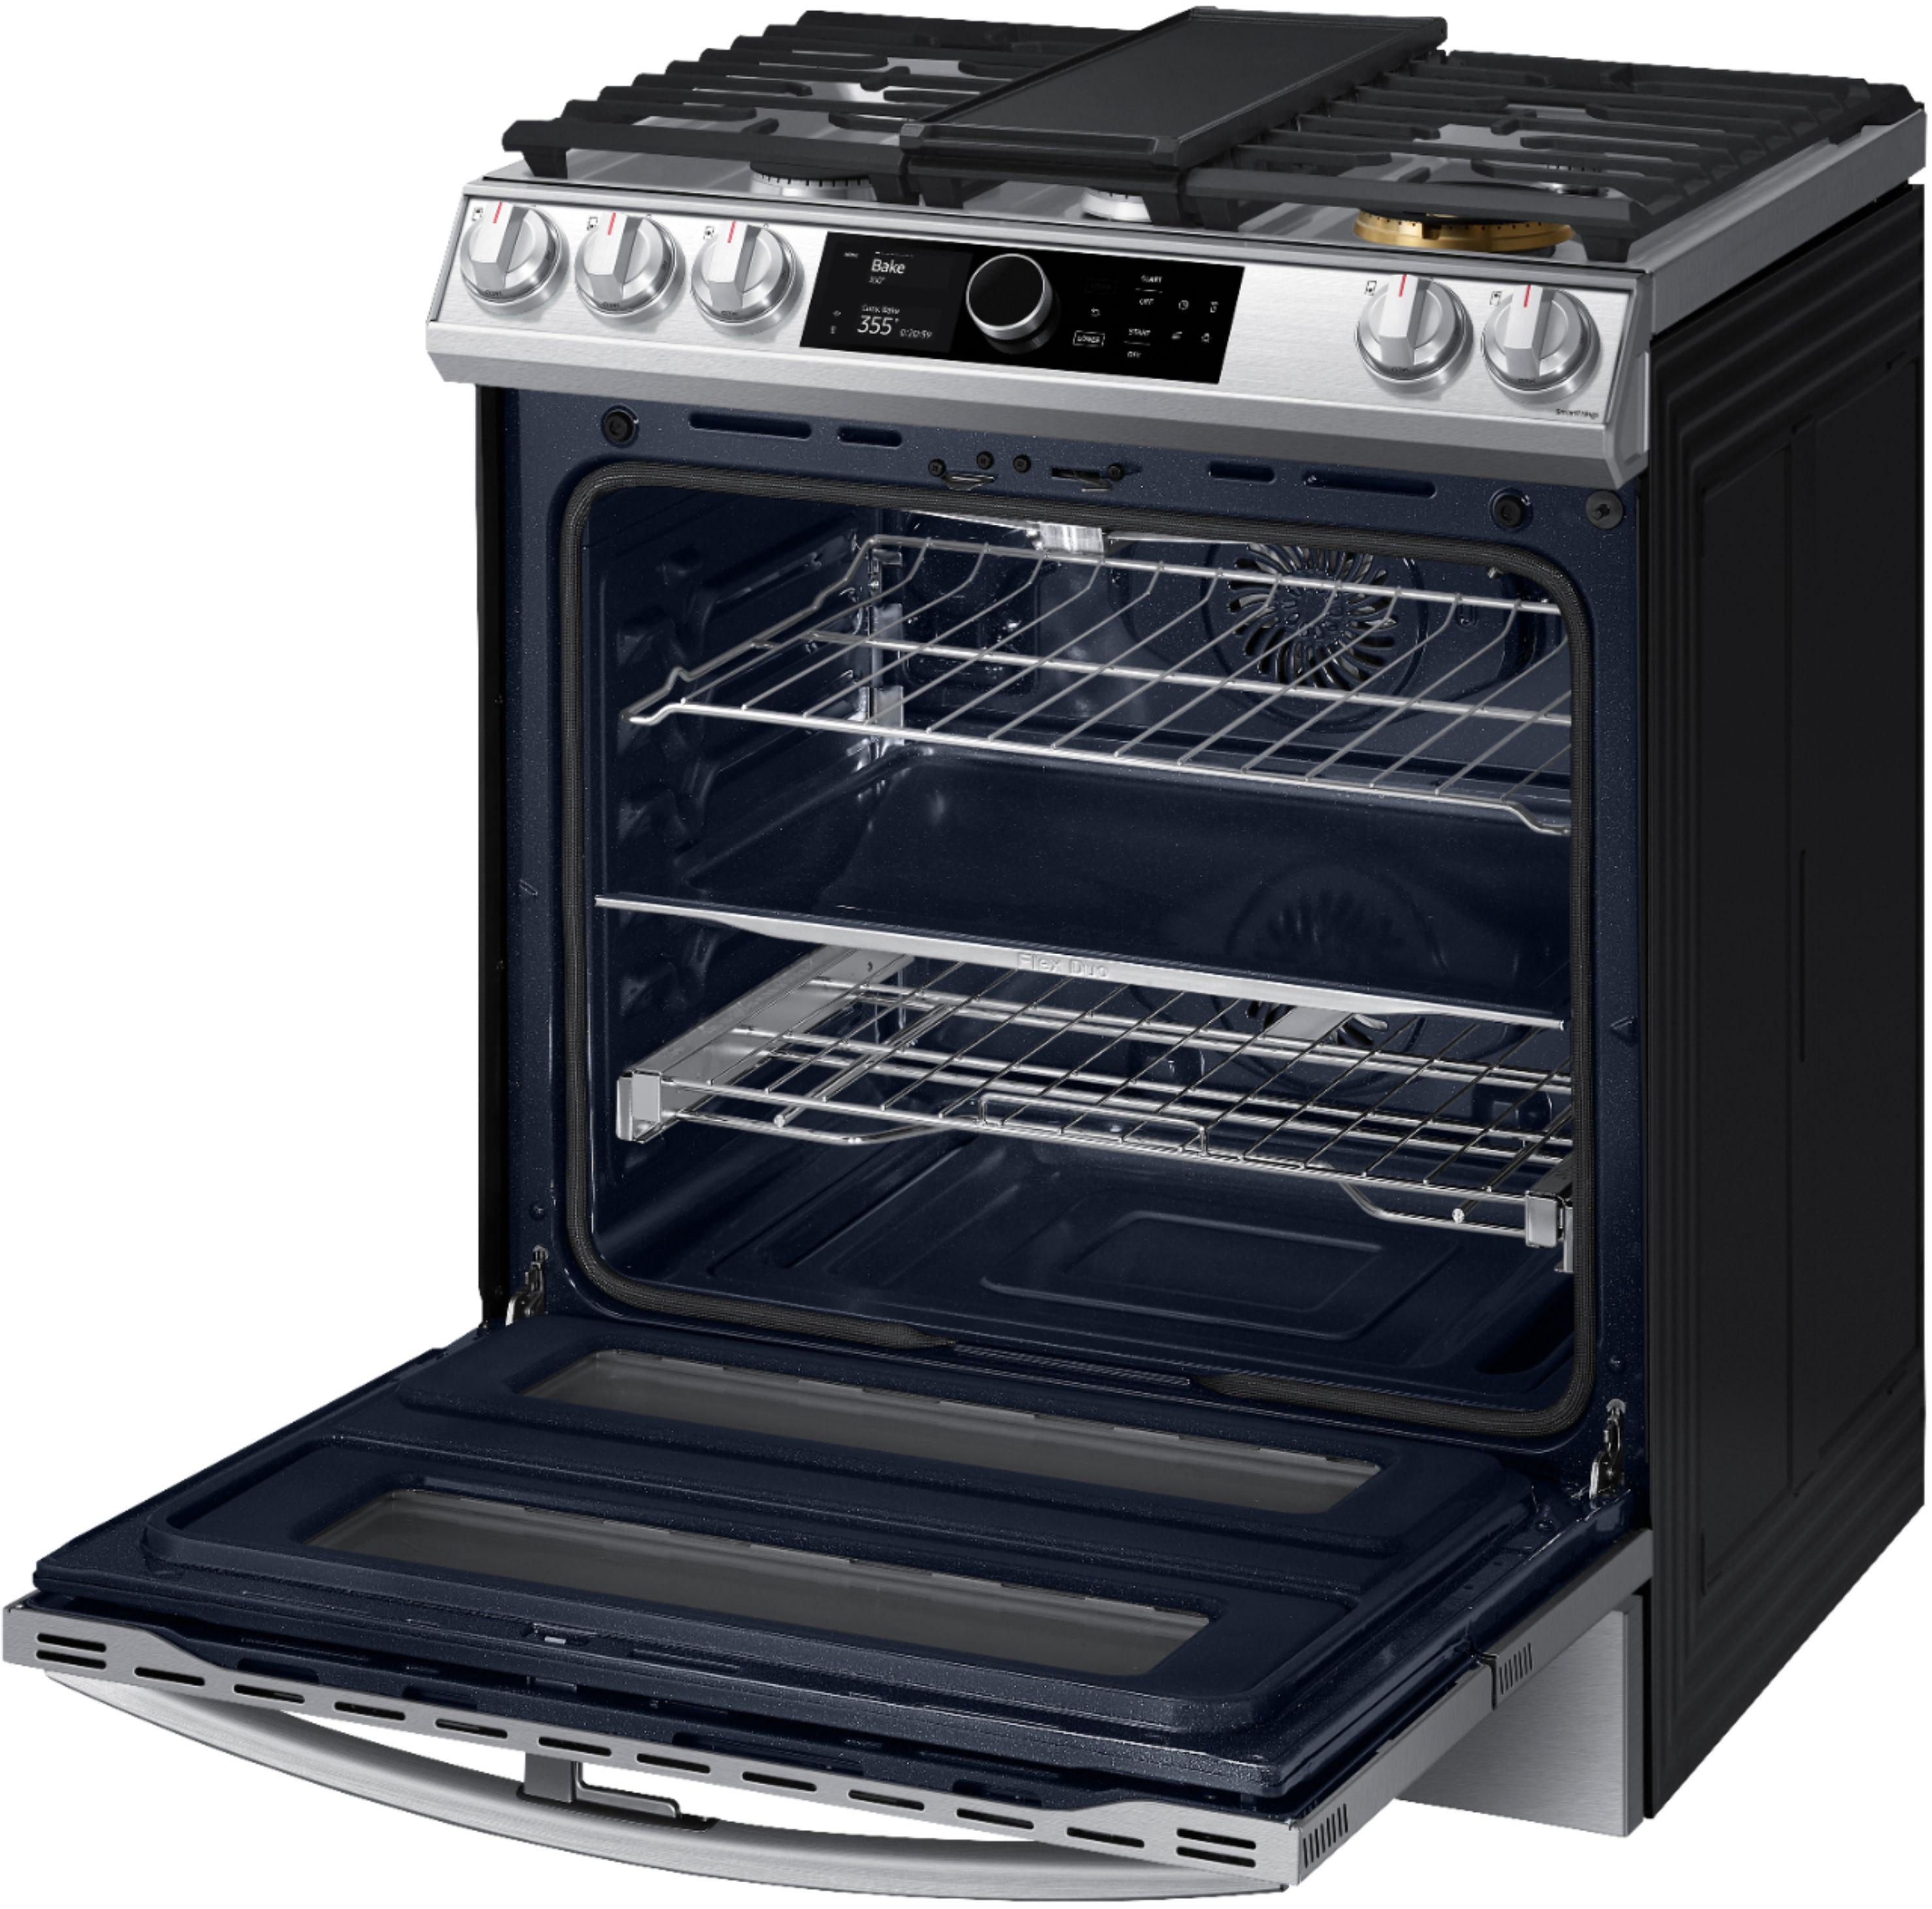 Samsung 6.0 cu. ft. Flex Duo Front Control Slide-in Gas Convection Range  with Smart Dial, Air Fry & Wi-Fi Fingerprint Resistant Stainless Steel  NX60T8751SS/AA - Best Buy